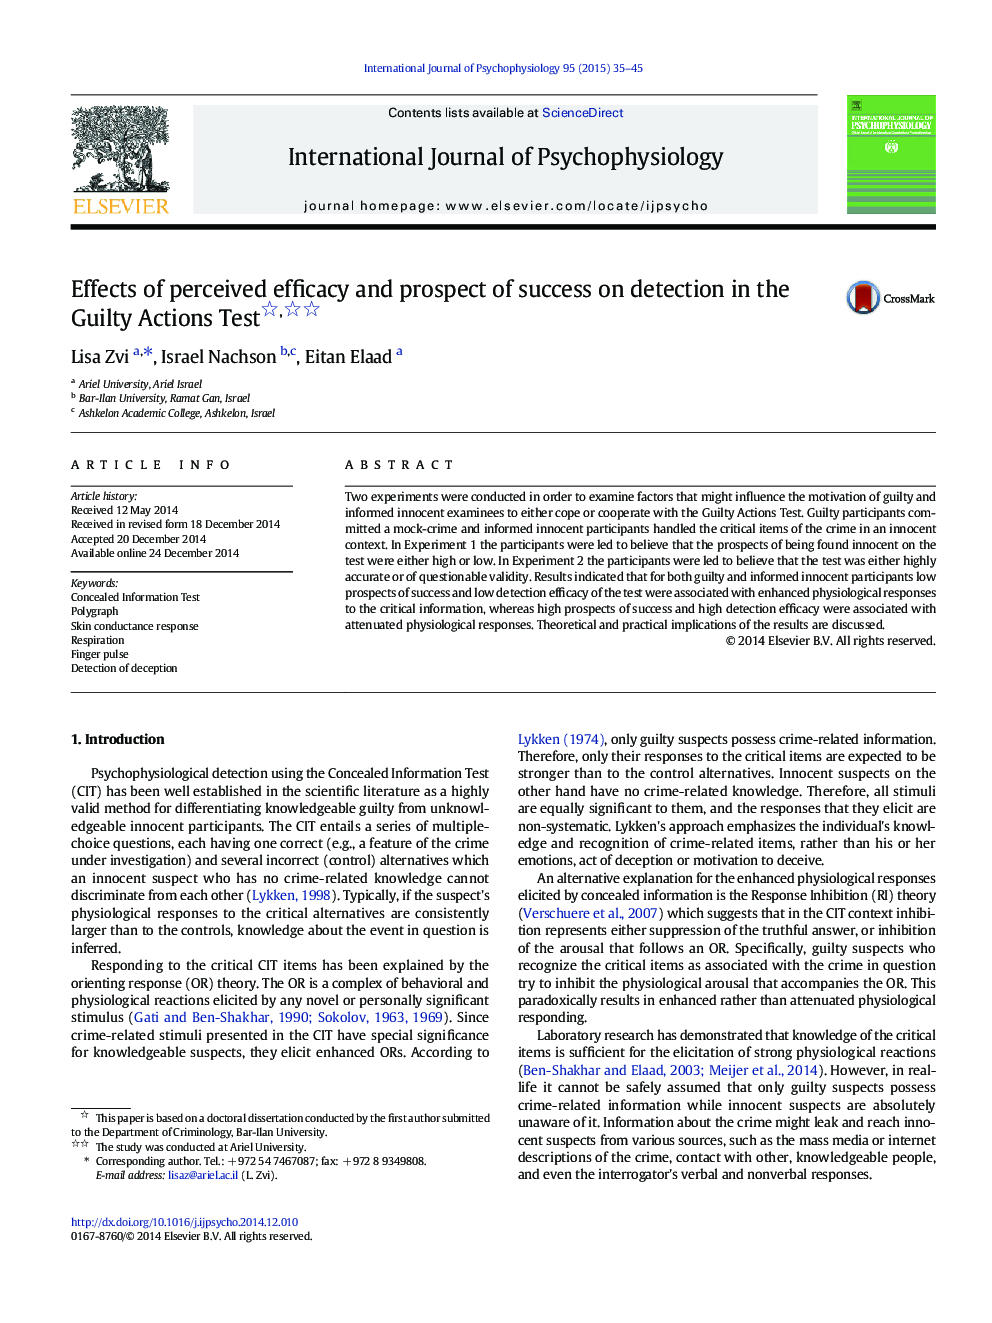 Effects of perceived efficacy and prospect of success on detection in the Guilty Actions Test 